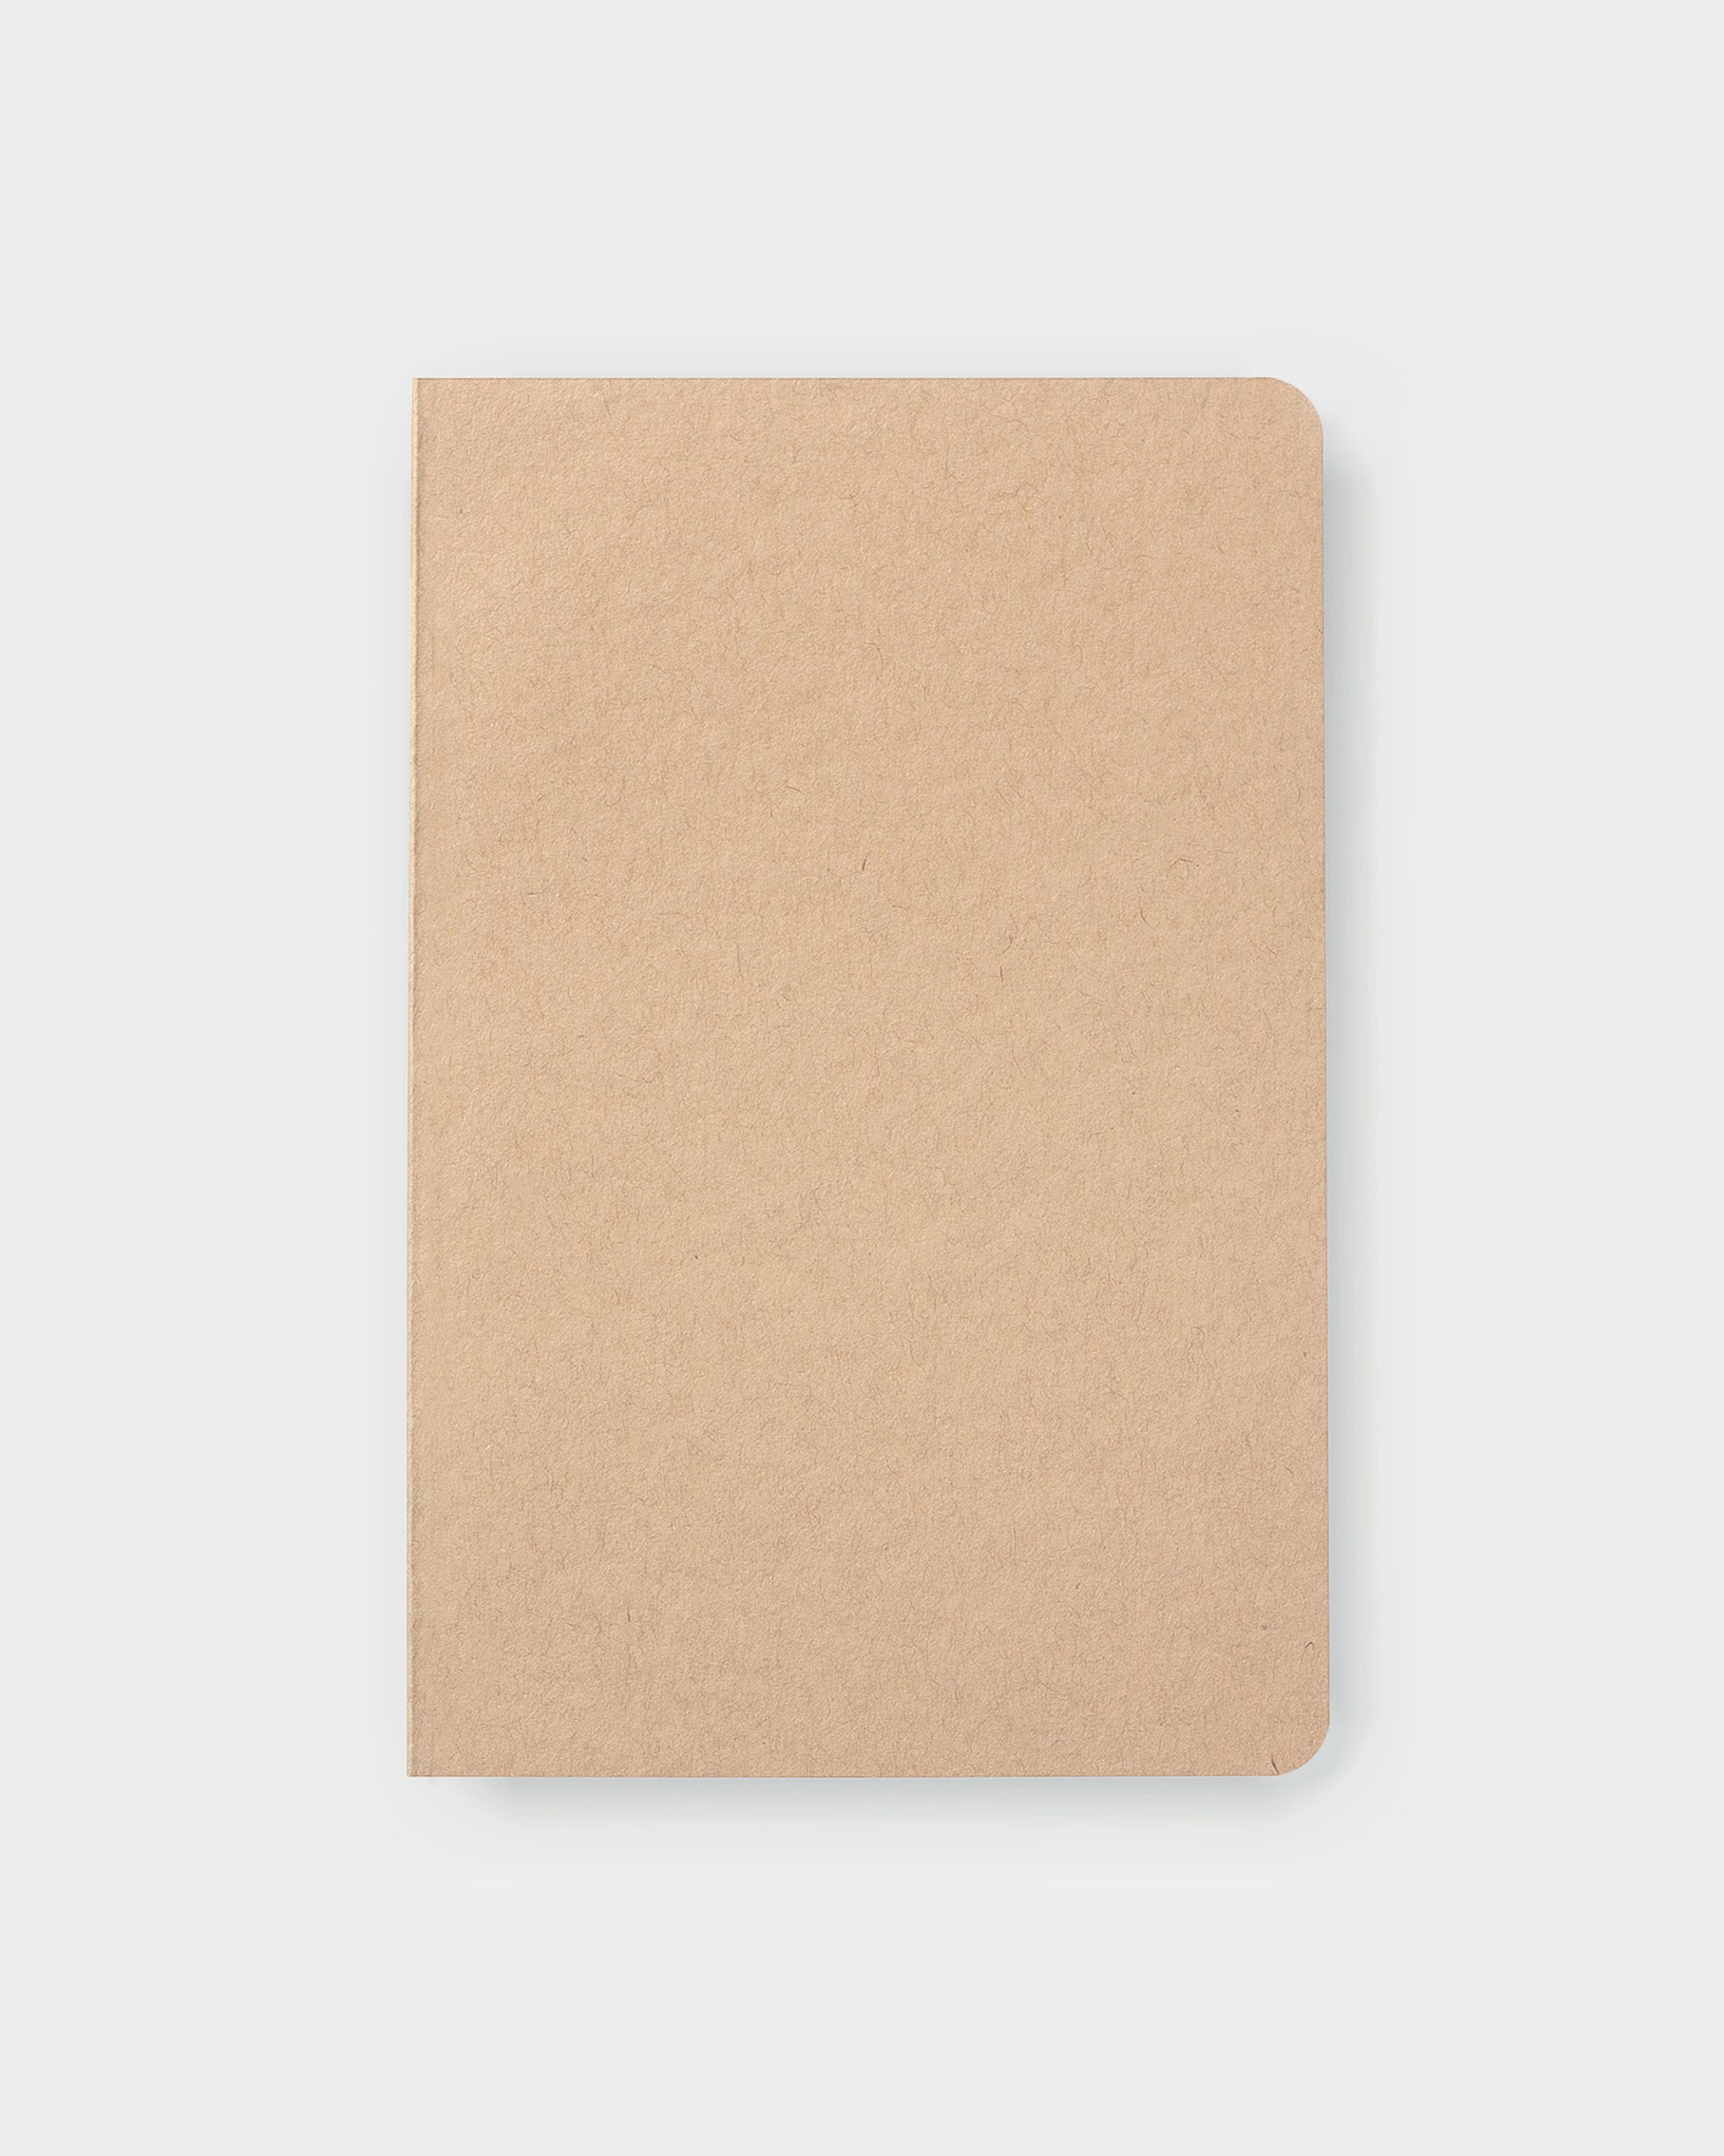 4.25 x 6.5" standard notebook, made with eco-friendly papers. Blank pages, kraft color way.